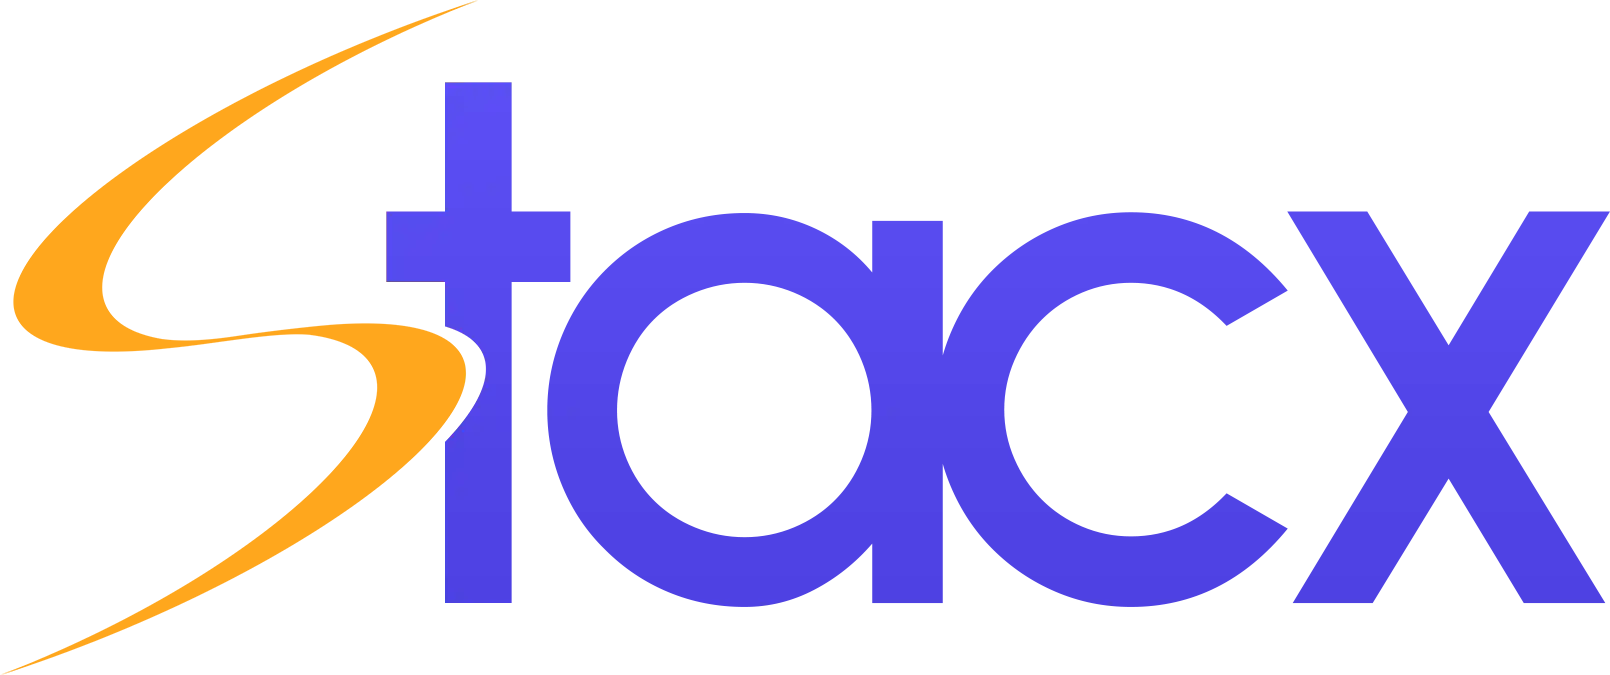 remote stacx